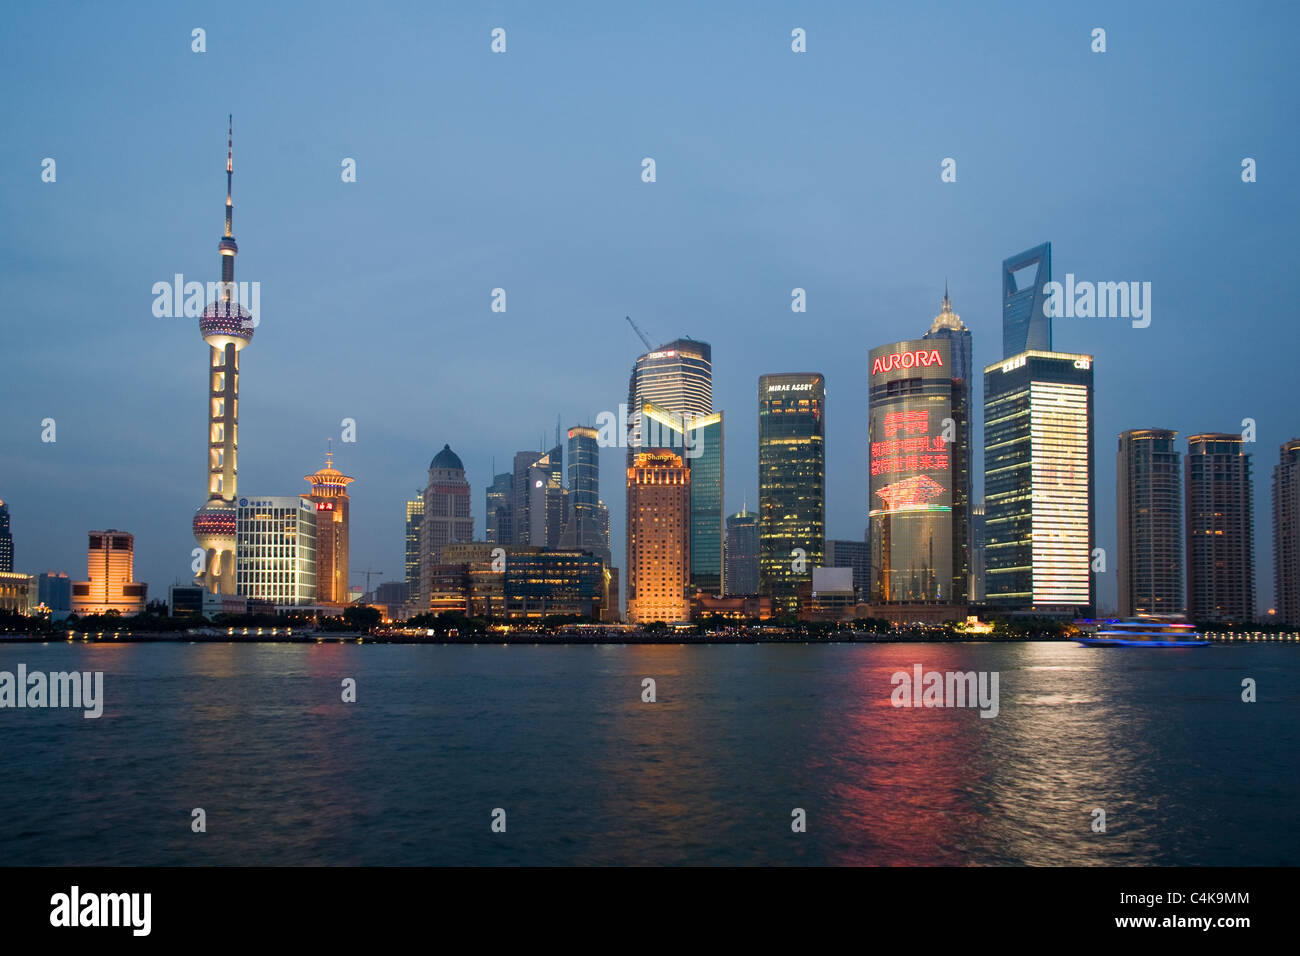 Shanghai's Pudong Skyline at dawn seen from the Bund Stock Photo